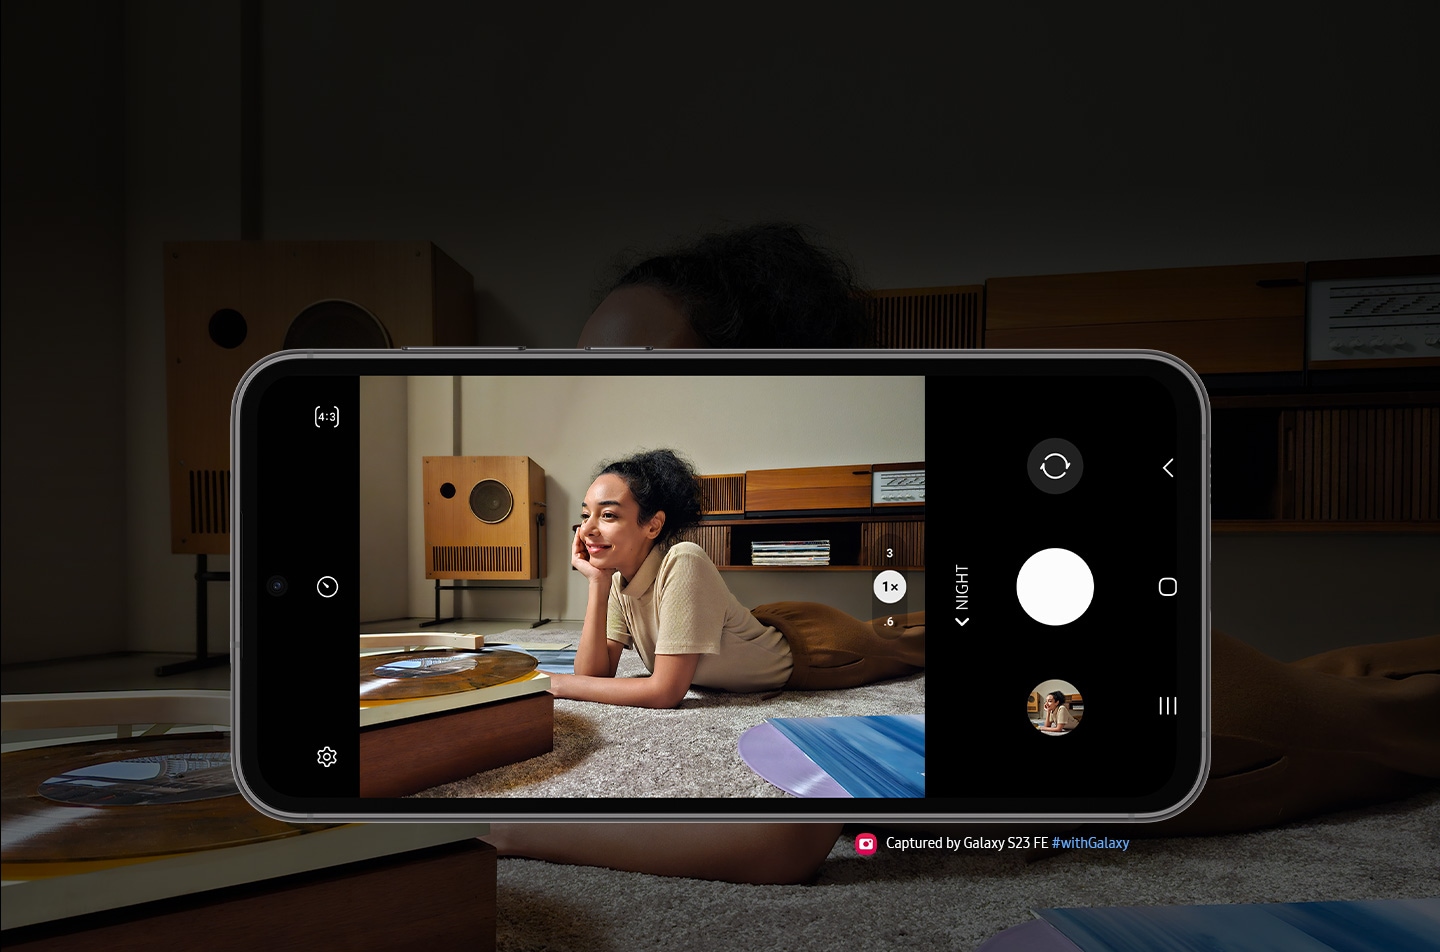 A Galaxy S23 FE device seen from the front and horizontal. The screen in picture mode shows a clear image of a woman listening to vinyl against the backdrop of a dimmer light setting. Text reads Captured by Galaxy S23 FE #withGalaxy.